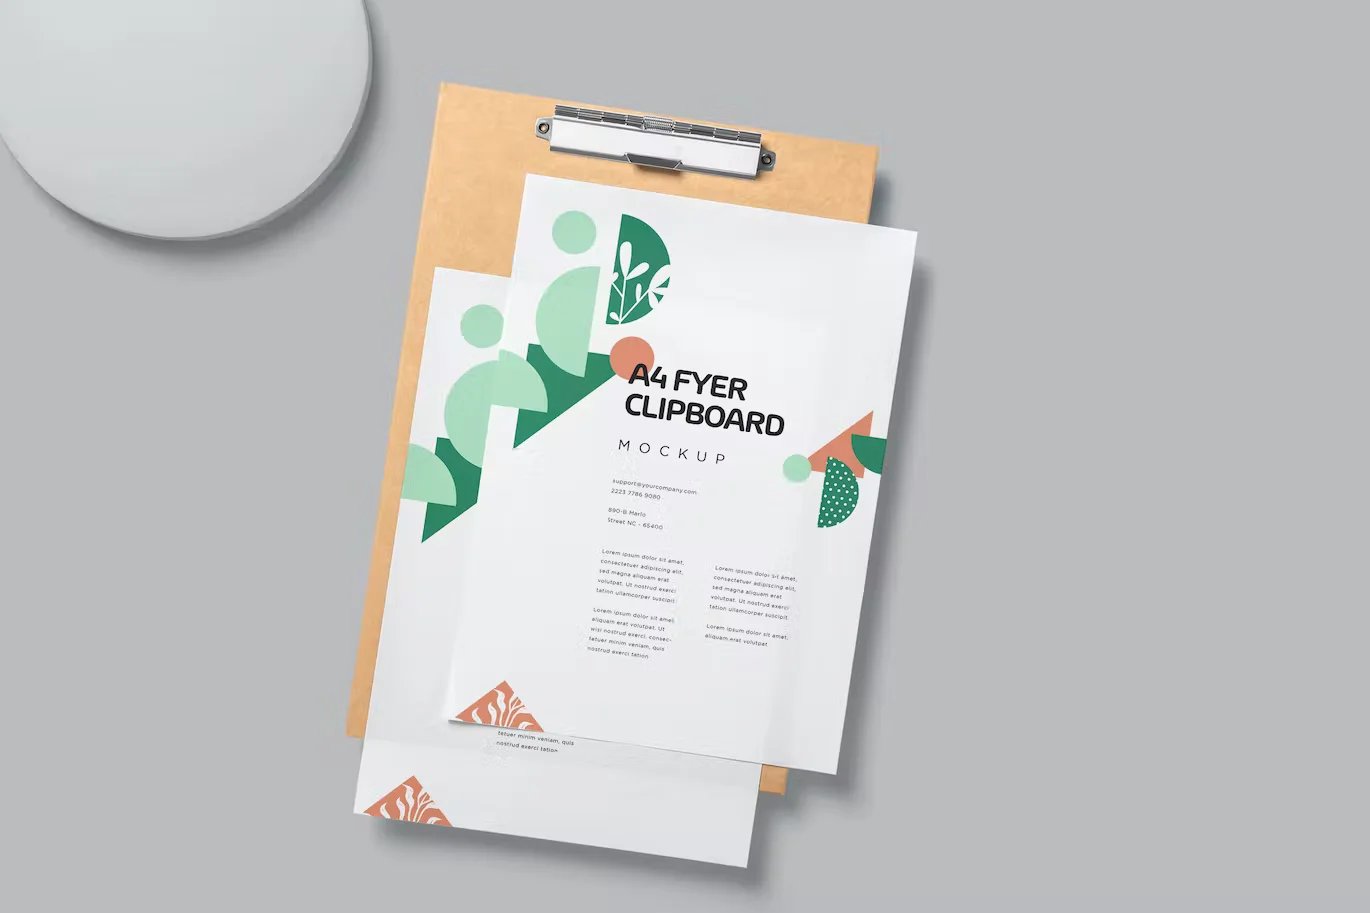 30+ Best Flyers Mockups To Help You With Effective Marketing